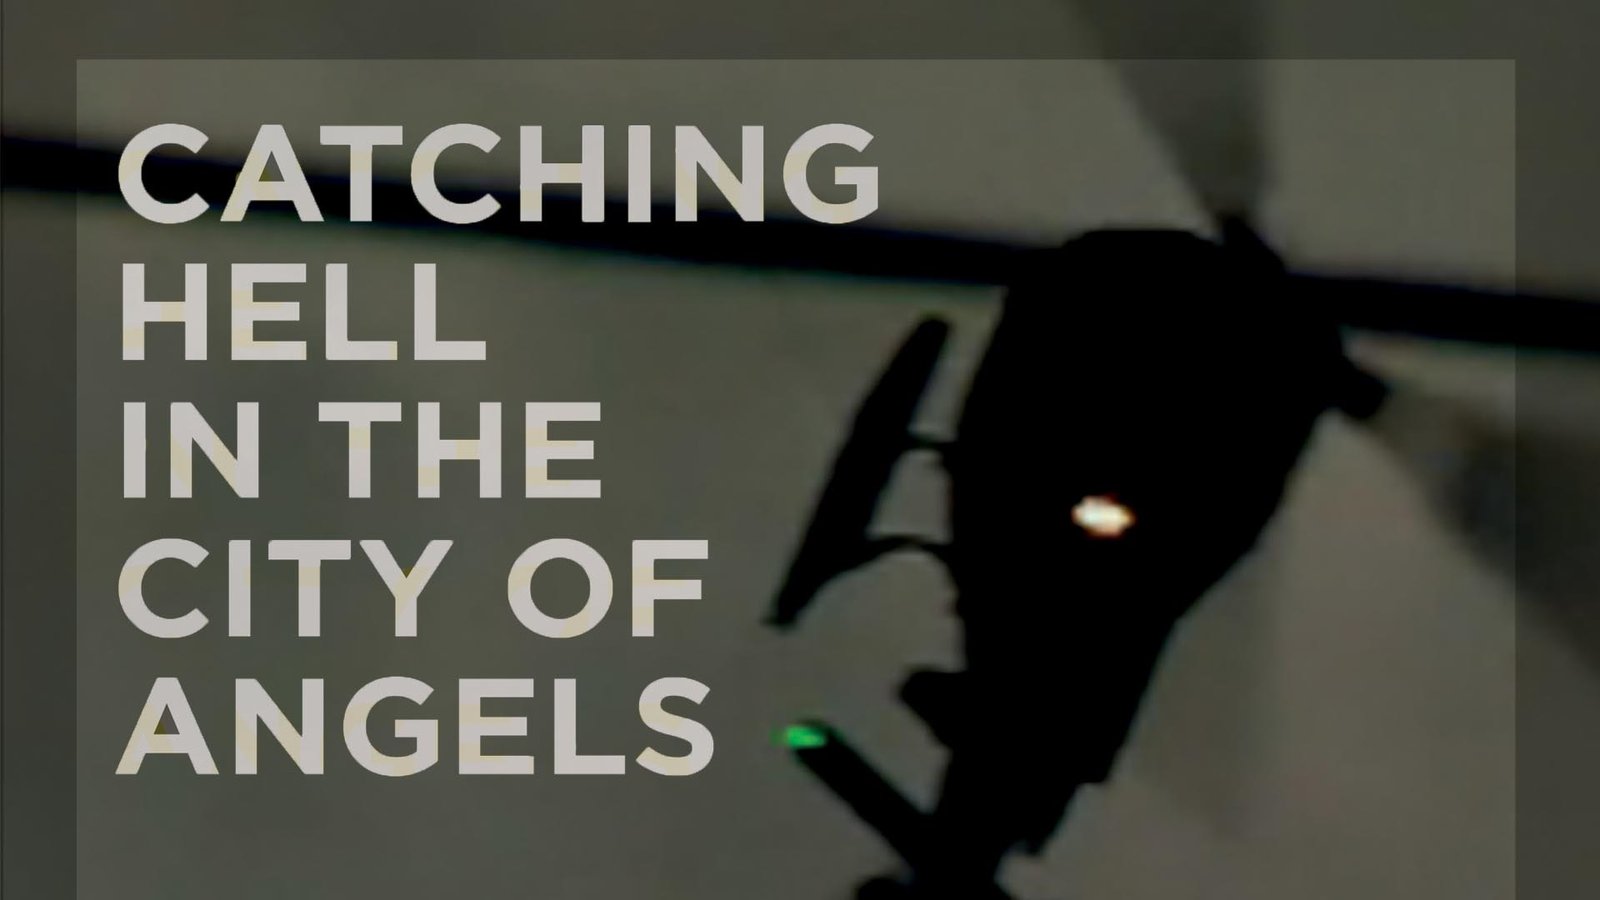 Catching Hell in the City of Angels - Daily Life in South Central Los Angeles